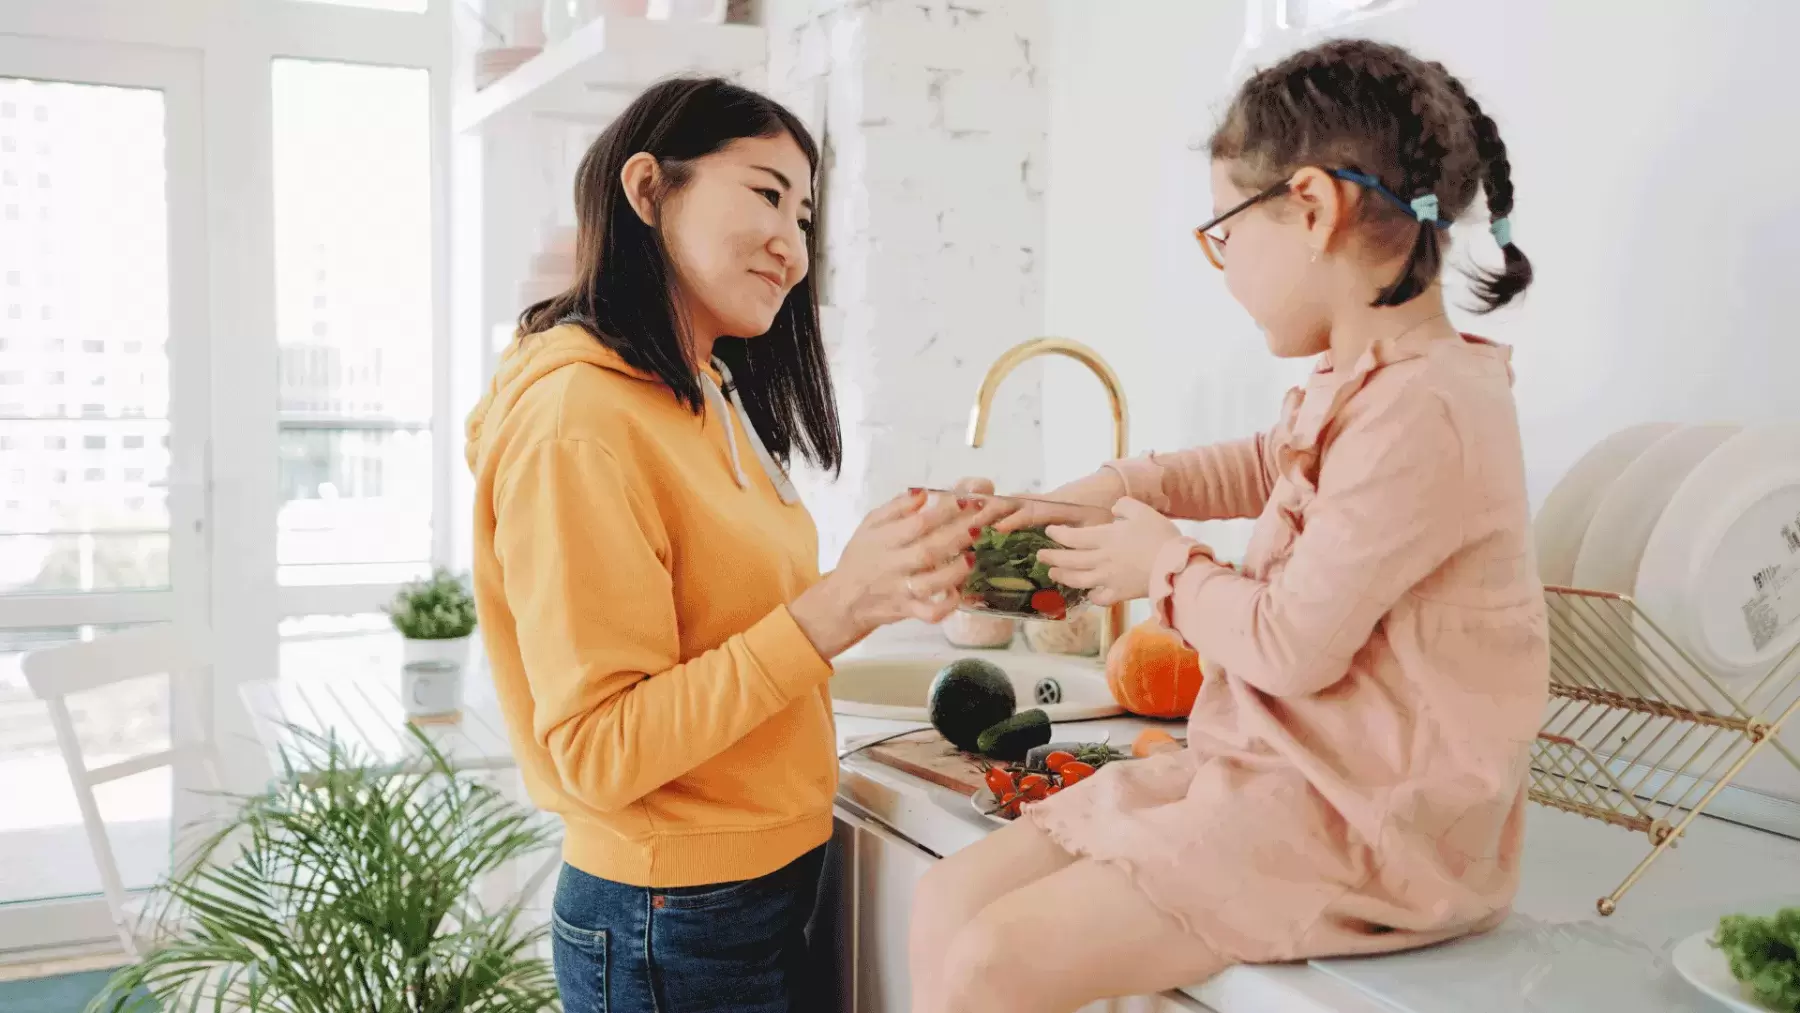 woman in orange sweatshirt is washing vegetables with little girl who is sitting on counter